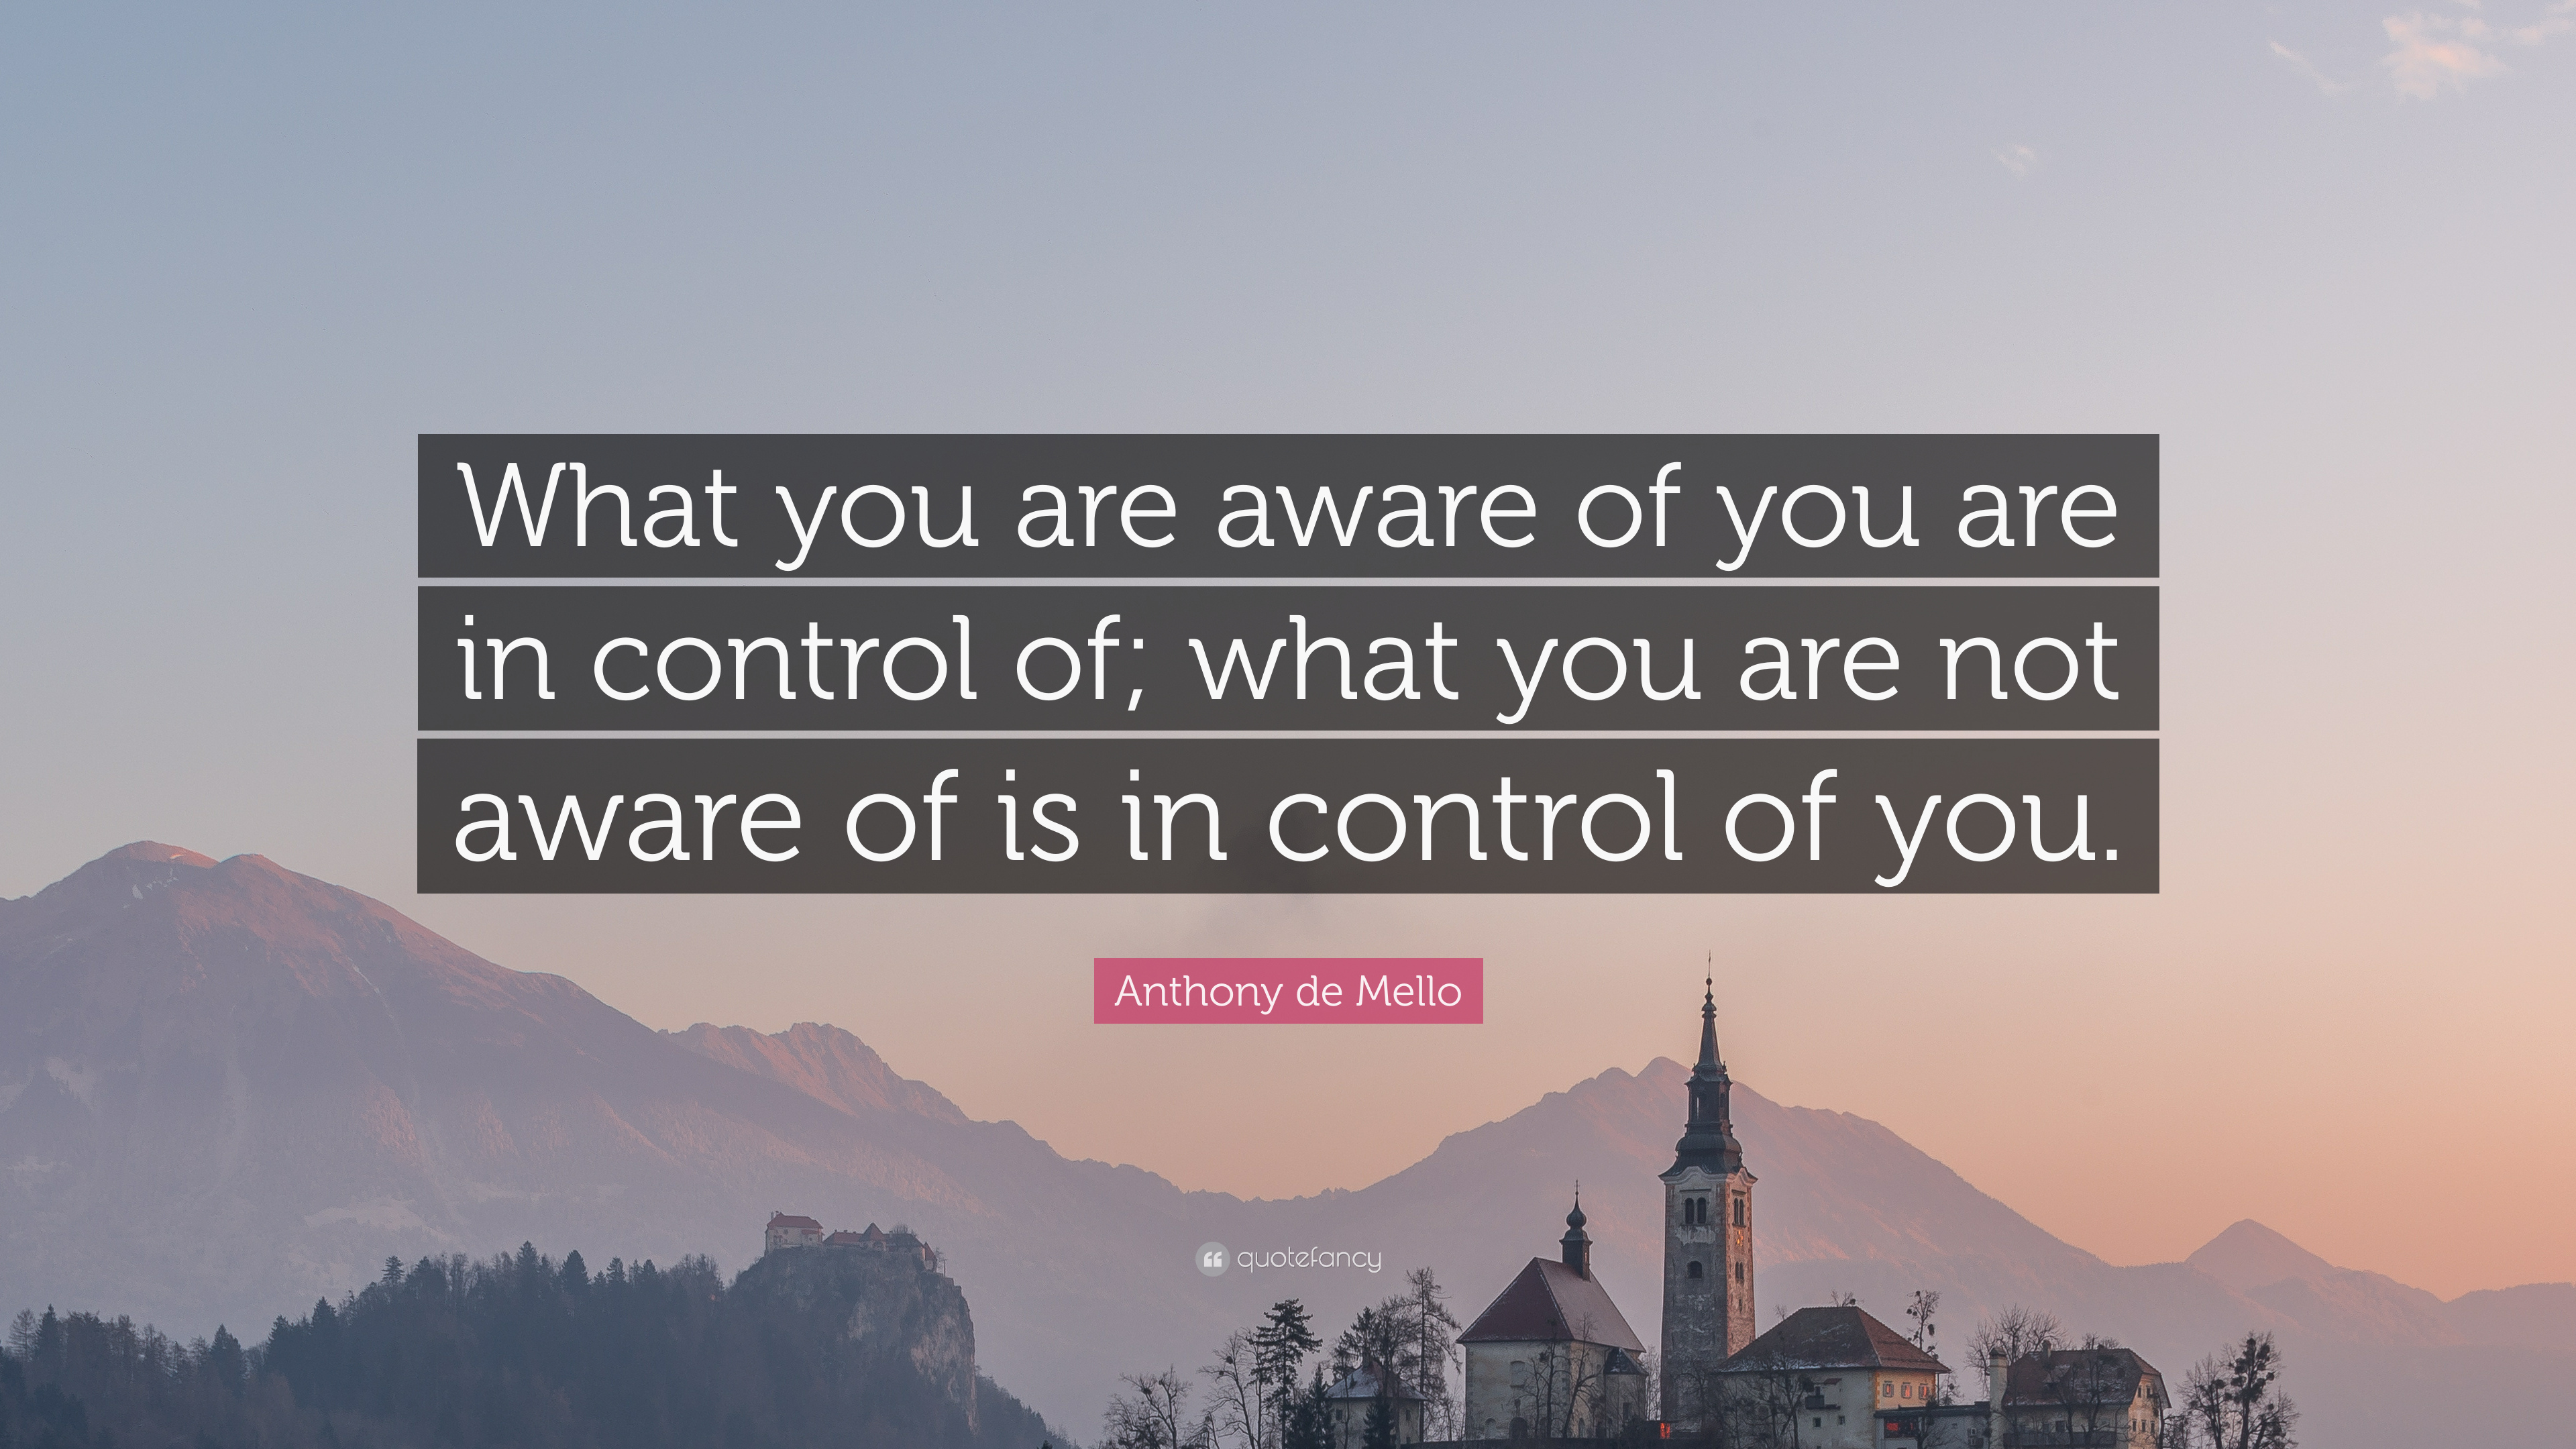 right intention quotes buddha - What you are aware of you are in control of; what you are not aware of is in control of you. - Anthony de Mello